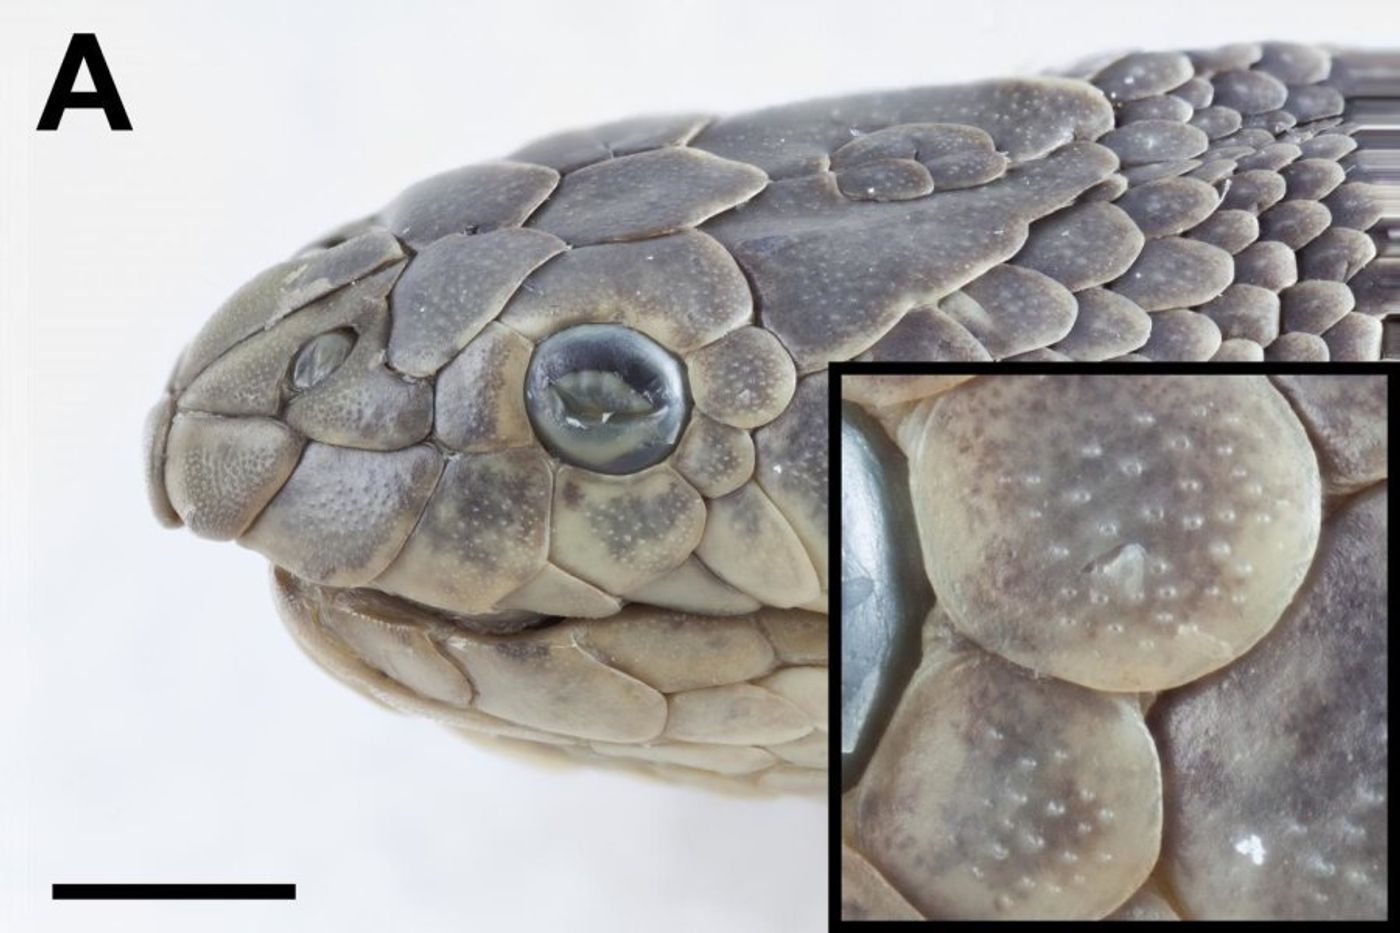 A sea snake's "scale sensilla" may be the key to how they are such good predators under water.